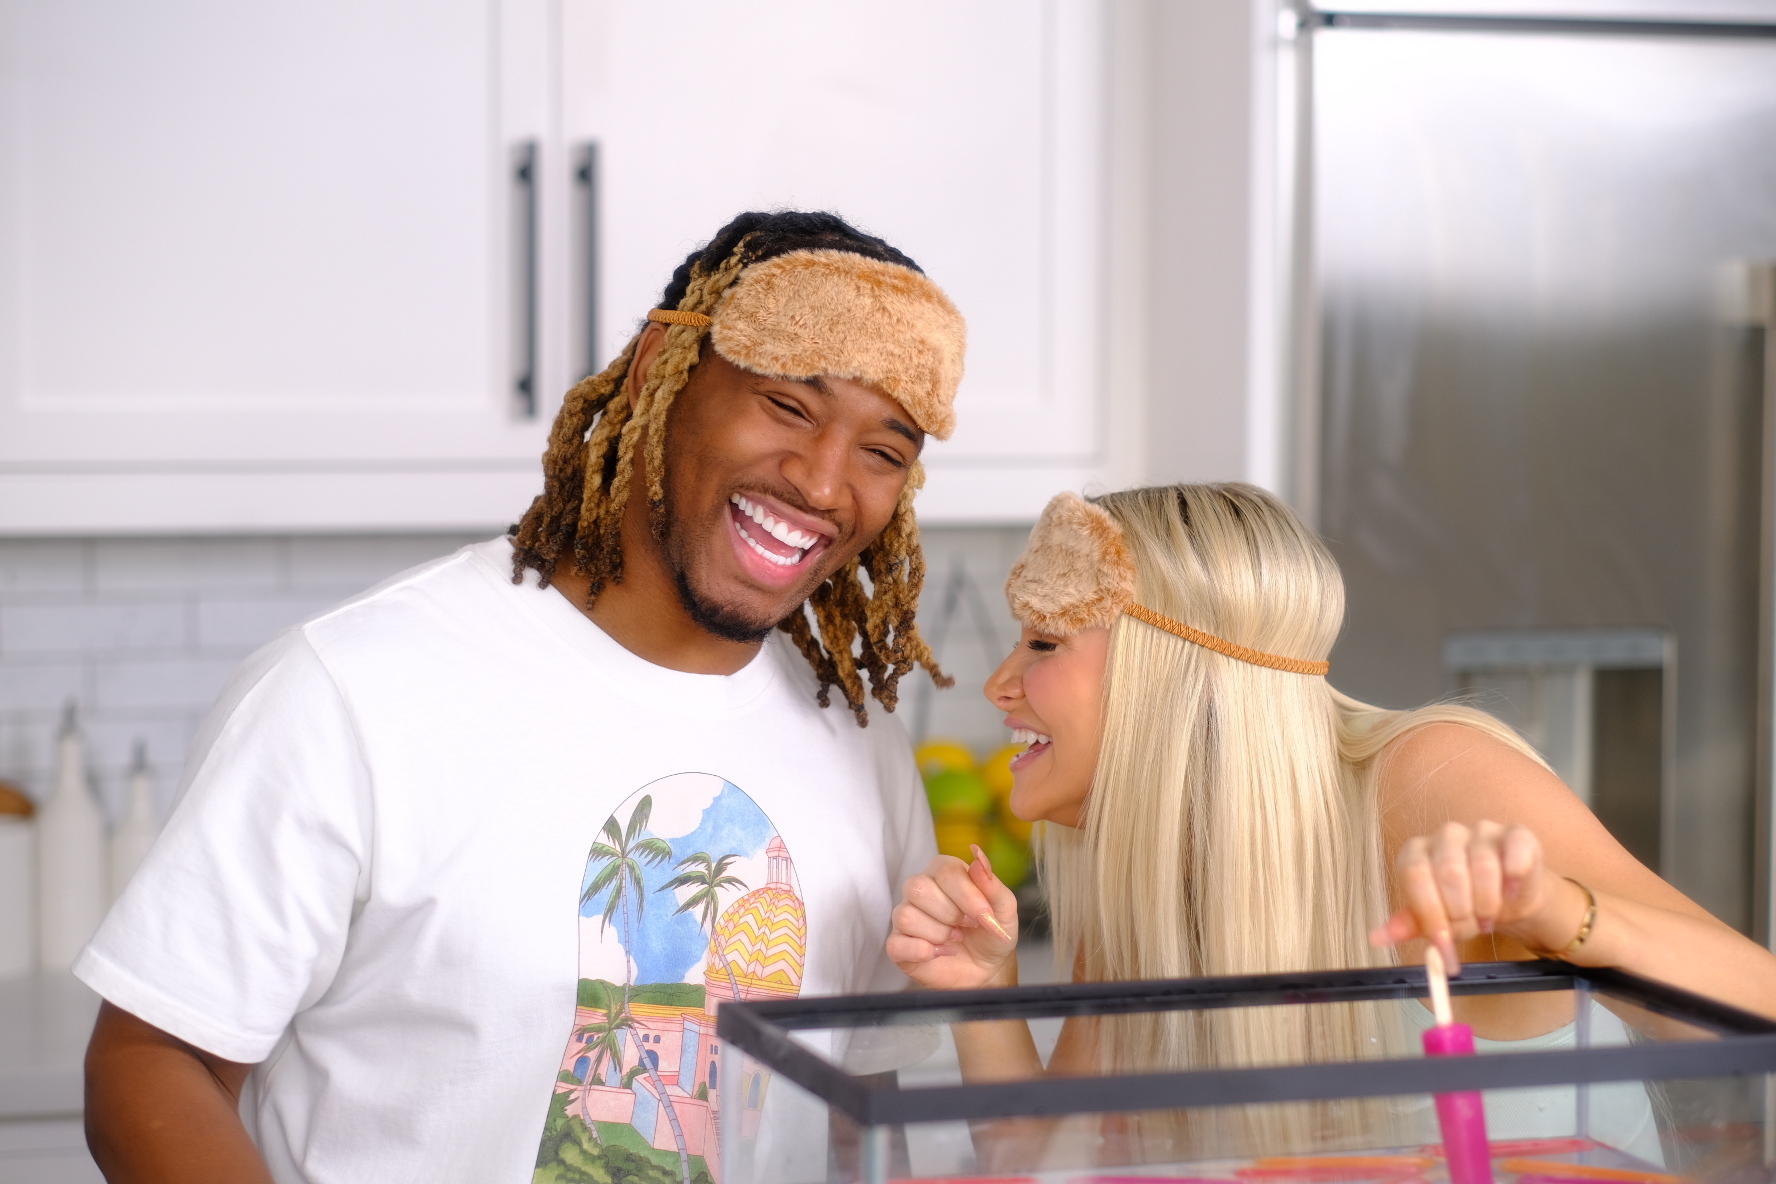 Couple content creators Charles & Alyssa in a kitchen setting while Alyssa holds a tray while the creators laugh